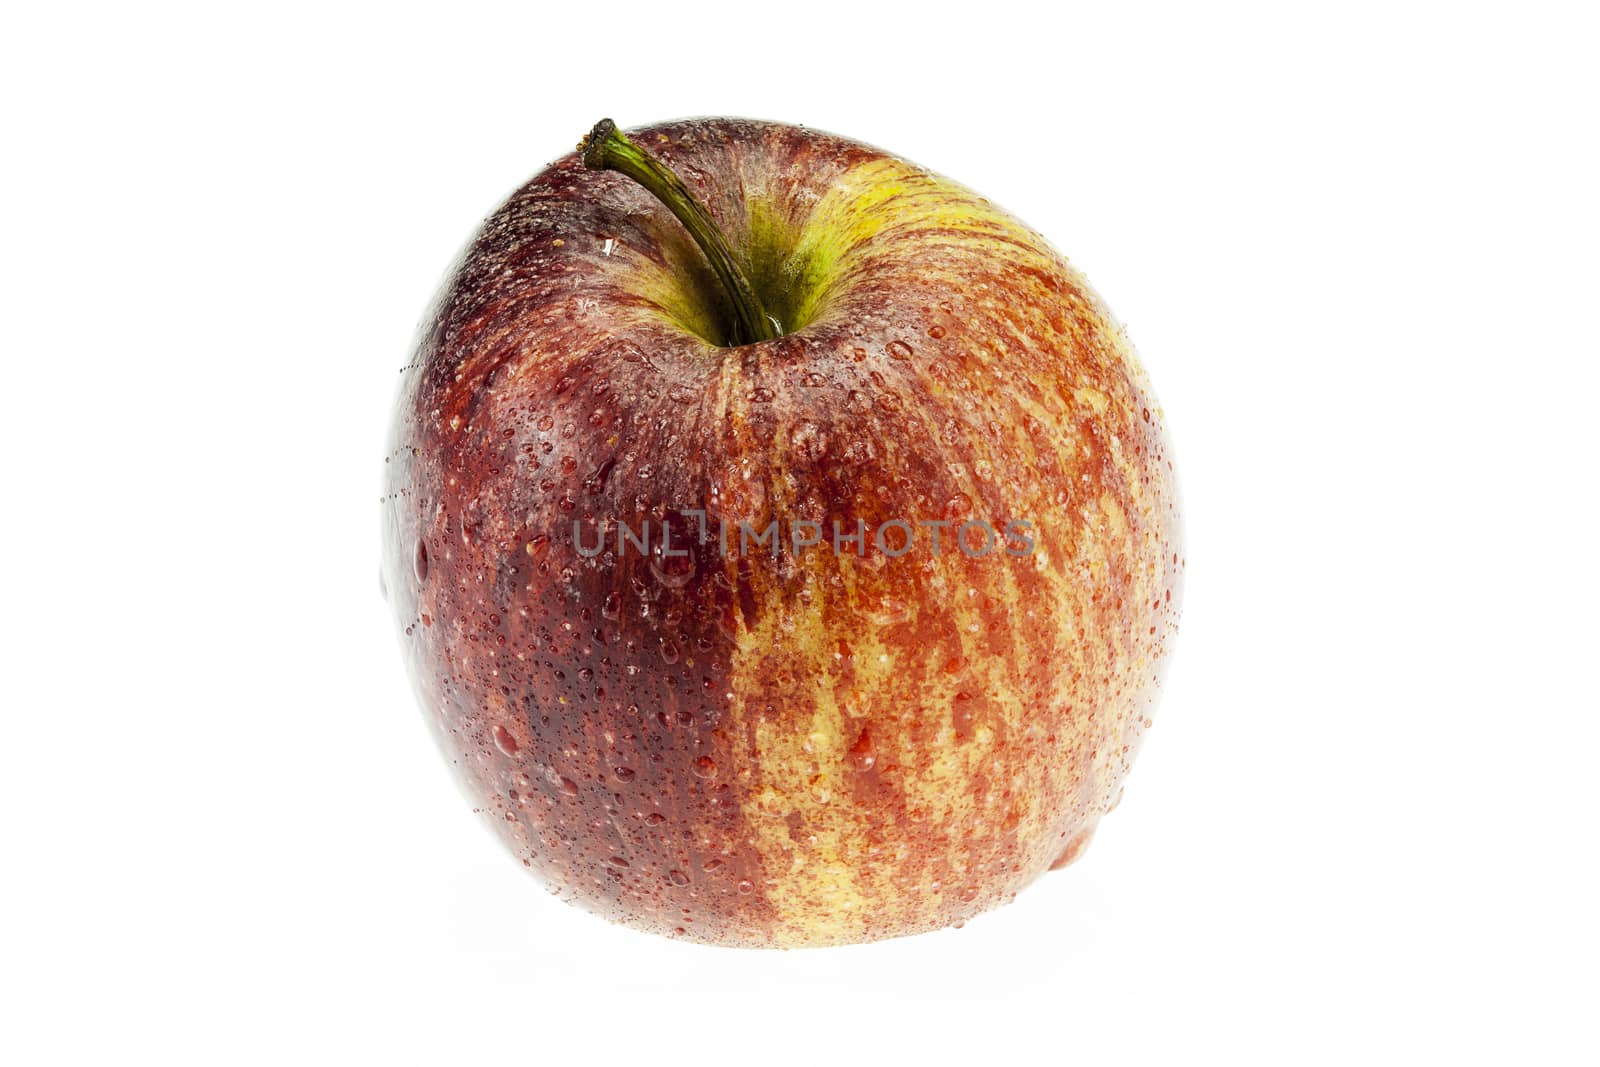 gala apple on white background cutout by Chattranusorn09